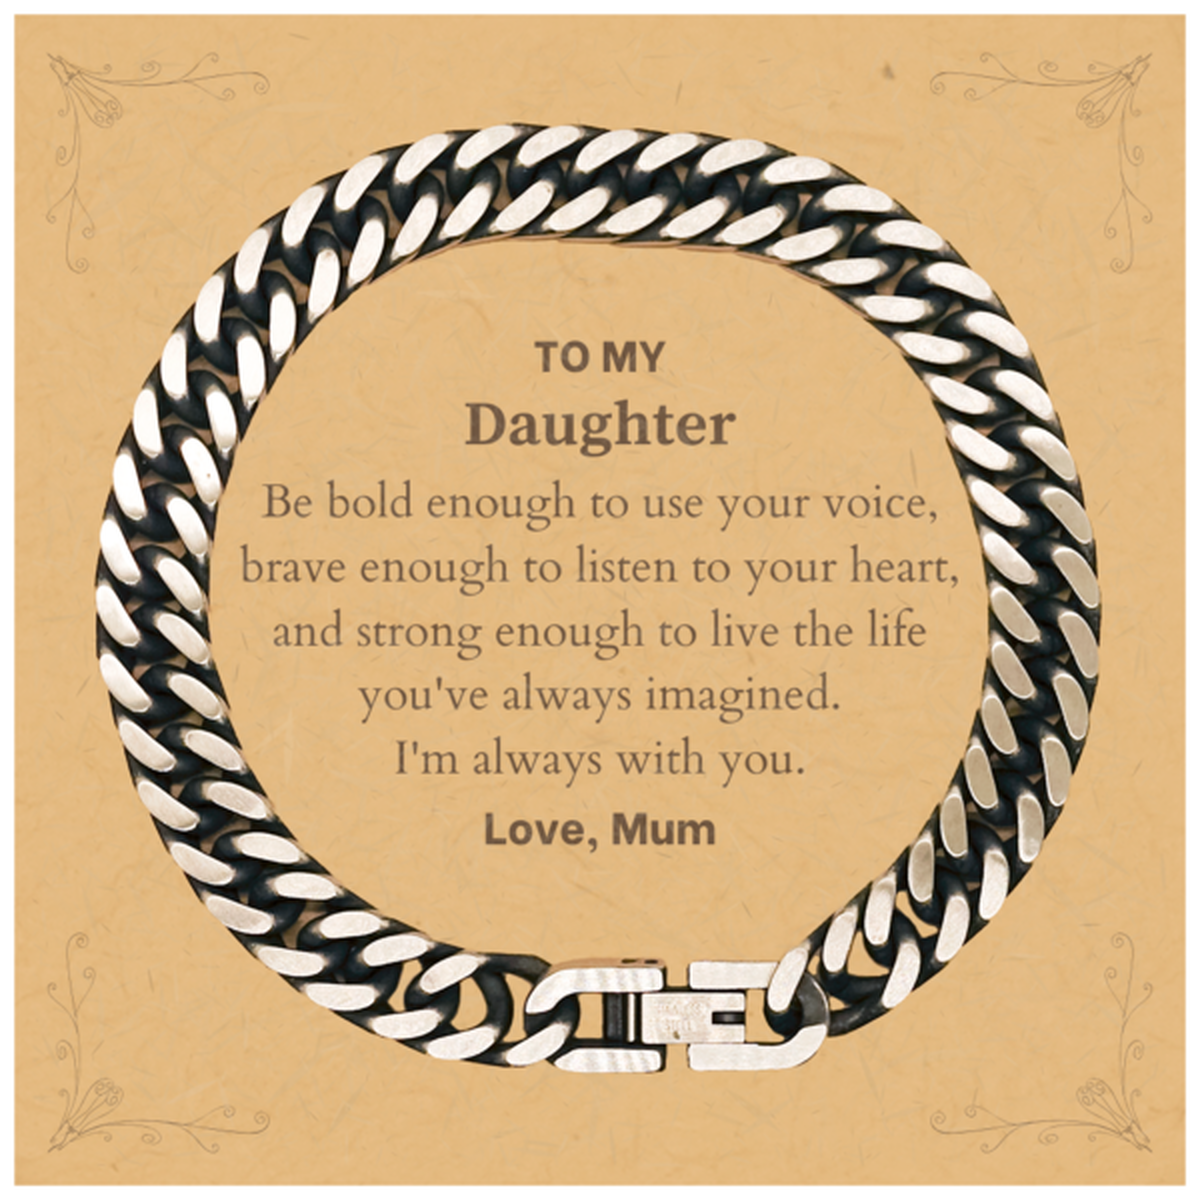 Keepsake Daughter Cuban Link Chain Bracelet Gift Idea Graduation Christmas Birthday Daughter from Mum, Daughter Be bold enough to use your voice, brave enough to listen to your heart. Love, Mum